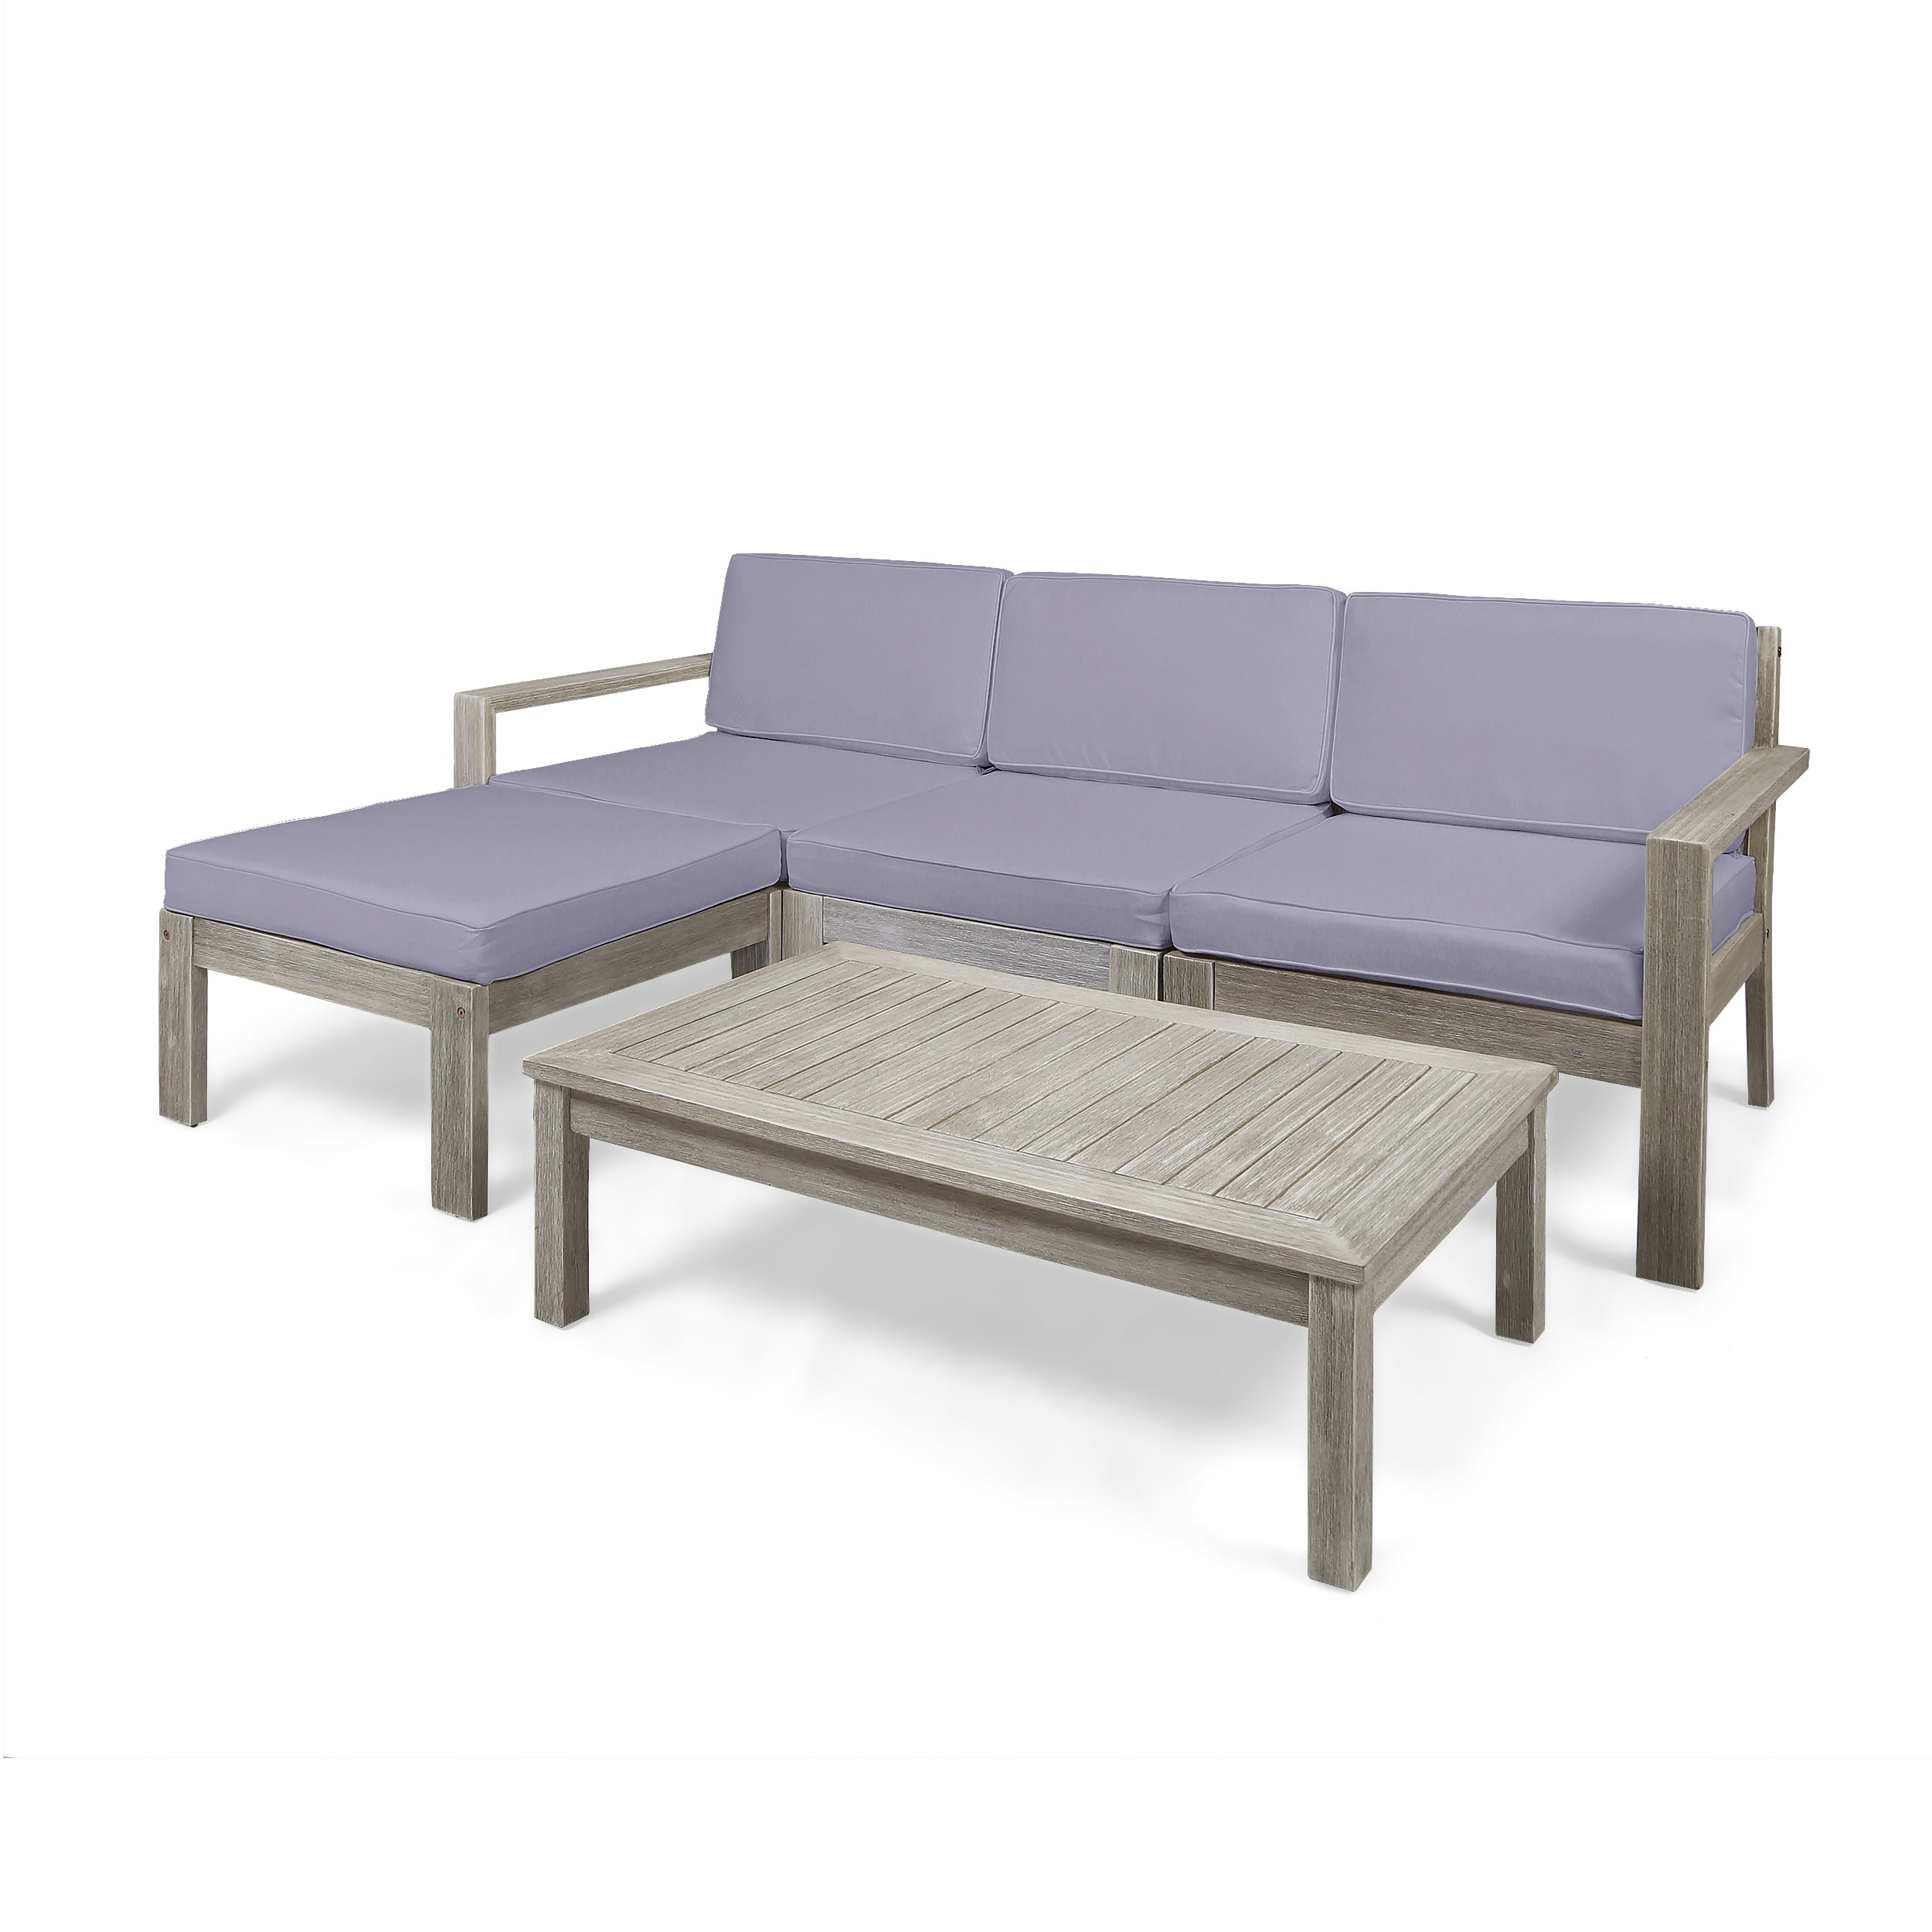 3 Seater Acacia Wood Sofa Sectional, Outdoor Wooden Sofa With Cushions